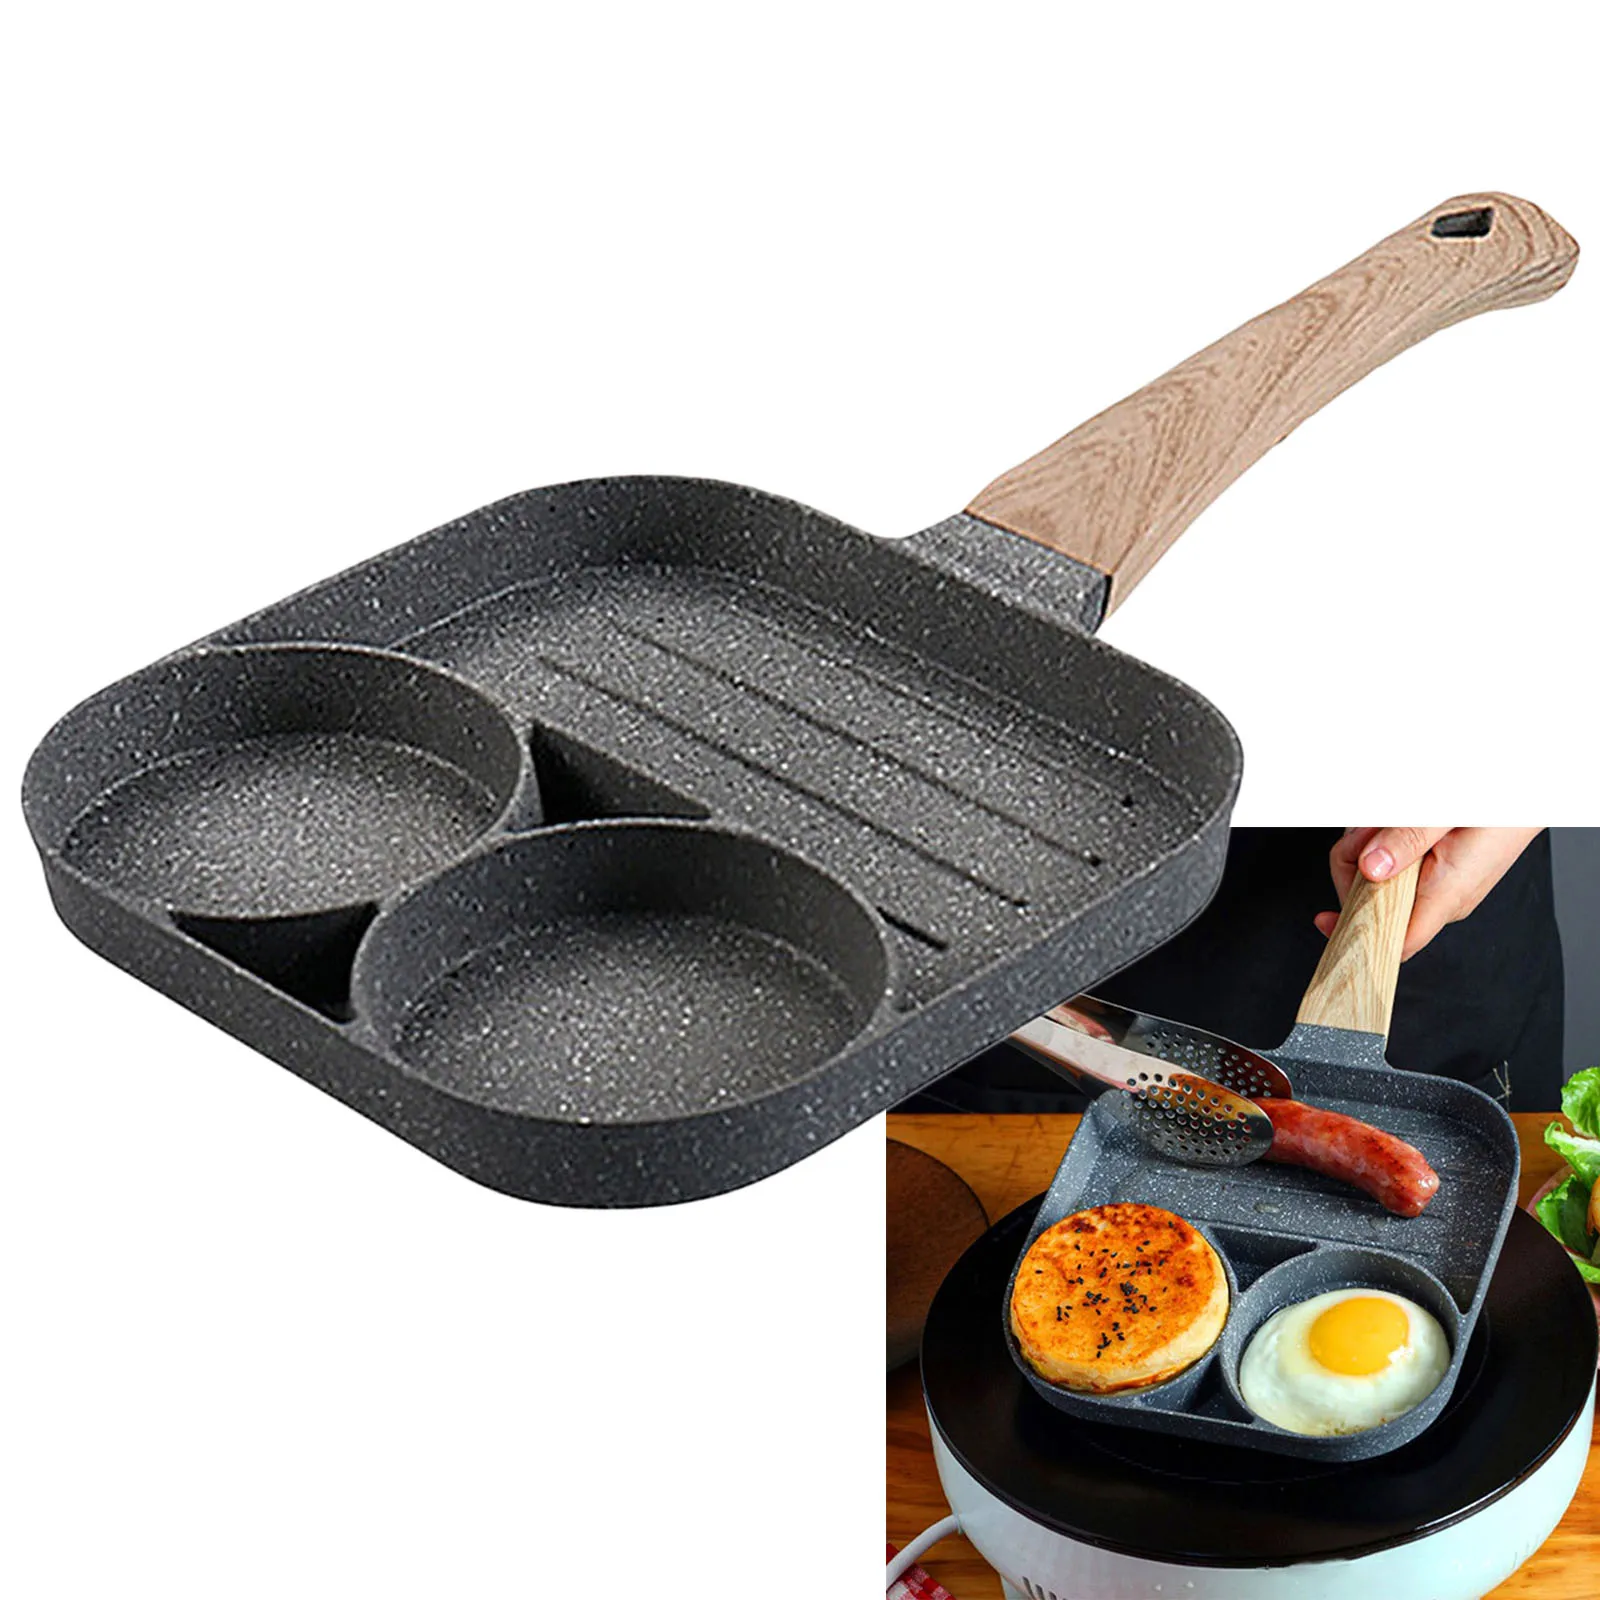 Medical Stone Egg Frying Pan Non Stick 3-Cup Bacon Sausage Hamburg Cooker Pan Skillet for Gas Stove Home Cooking Tool